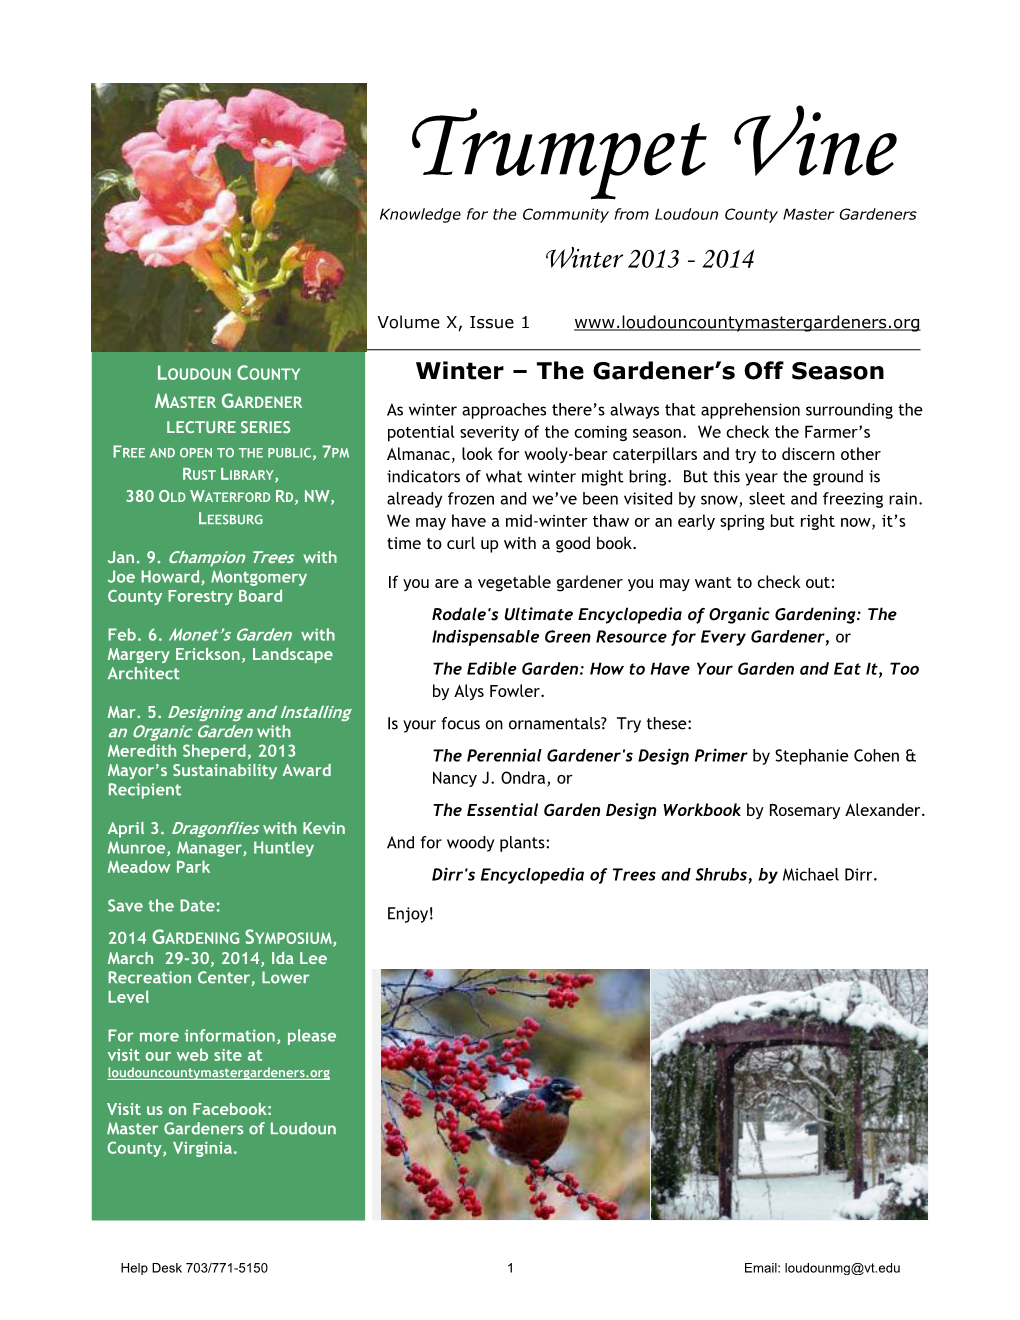 Trumpet Vine Knowledge for the Community from Loudoun County Master Gardeners Winter 2013 - 2014